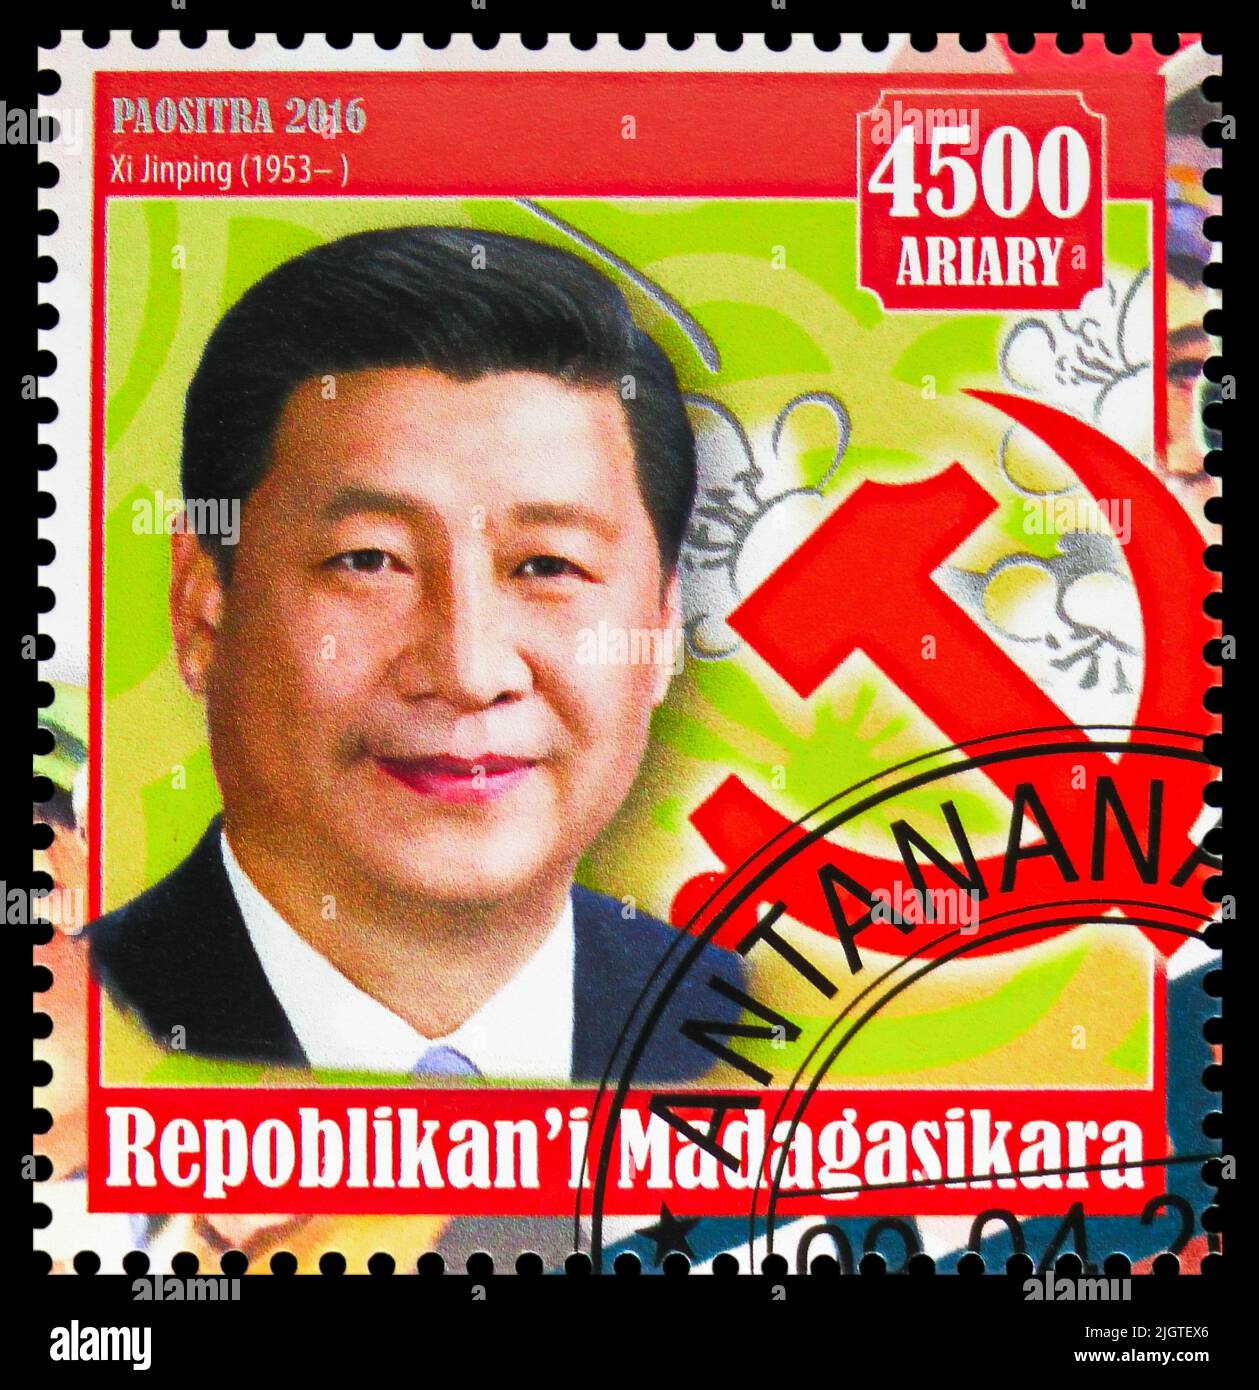 MOSCOW, RUSSIA - JUNE 17, 2022: Postage stamp printed in Madagascar shows Xi Jinping, Leaders of Republic of China serie, circa 2016 Stock Photo